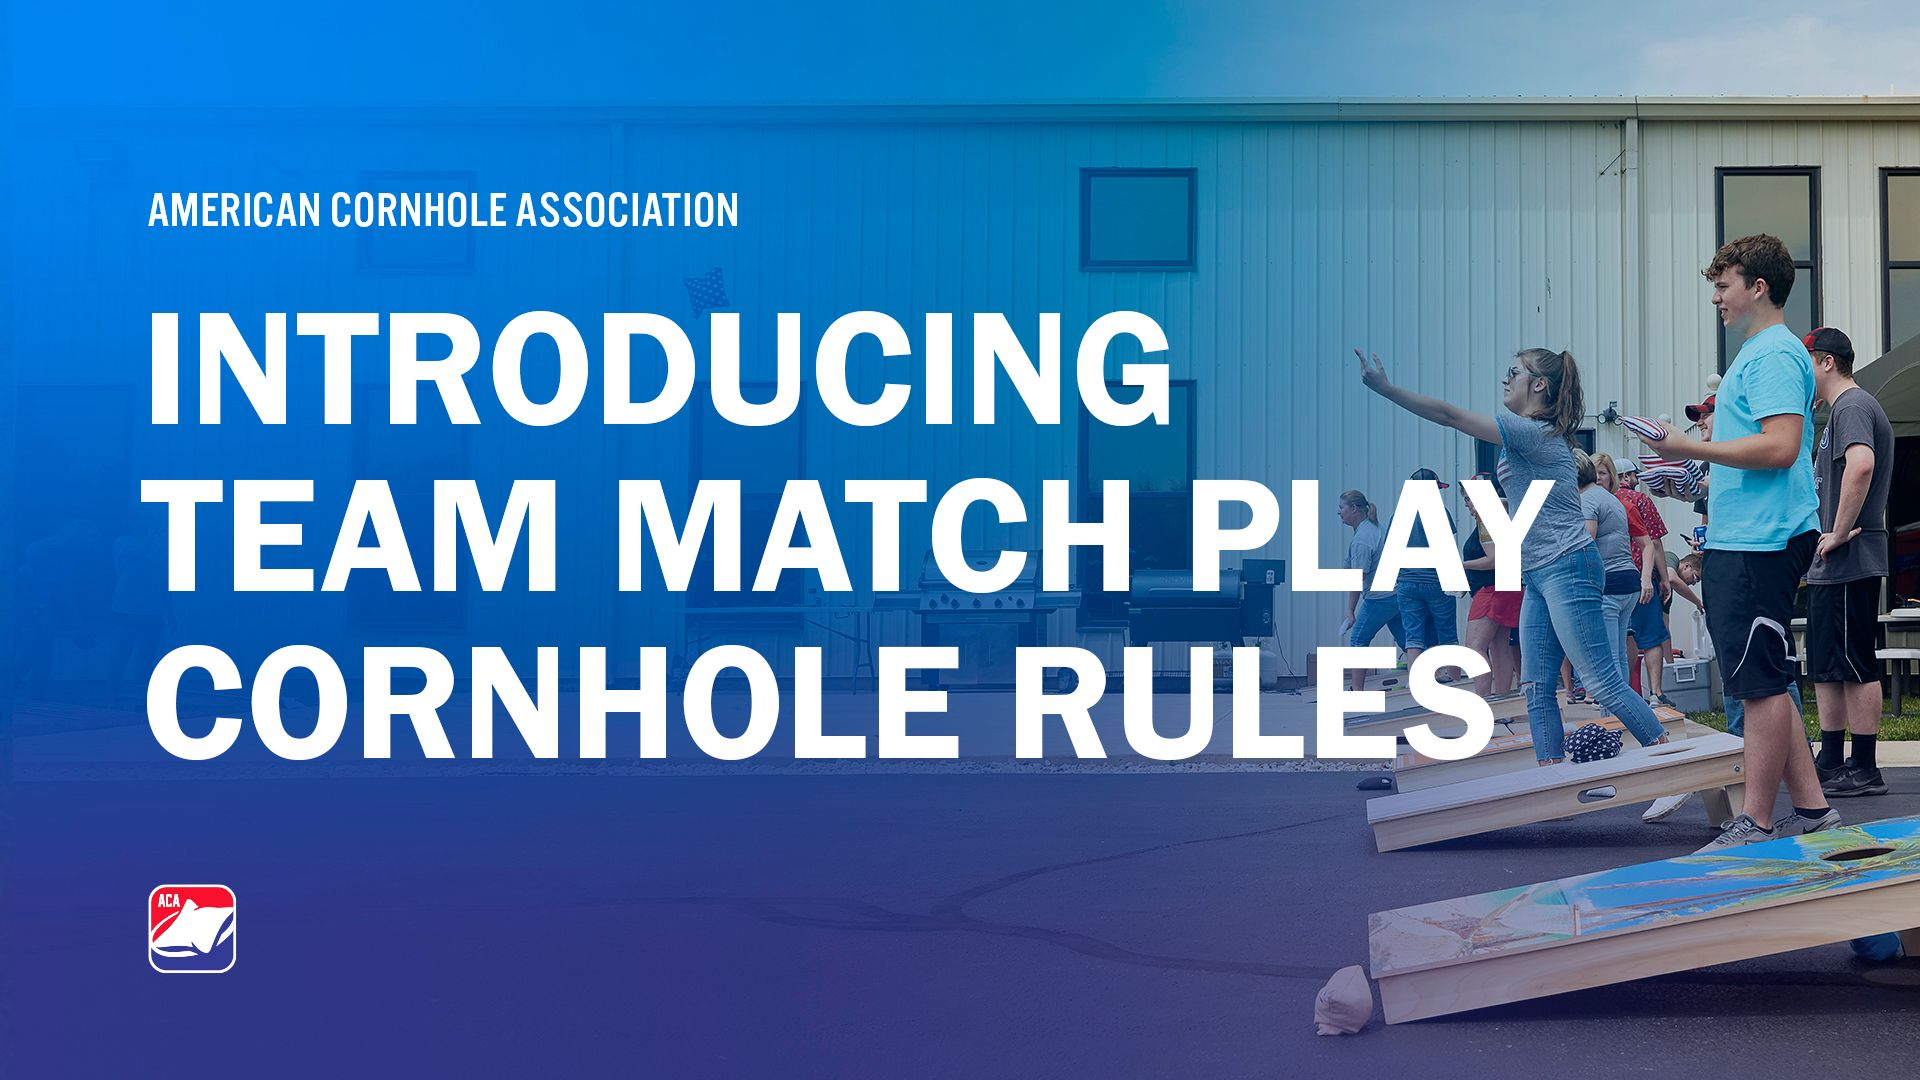 An All New Way To Play Cornhole Is Here!